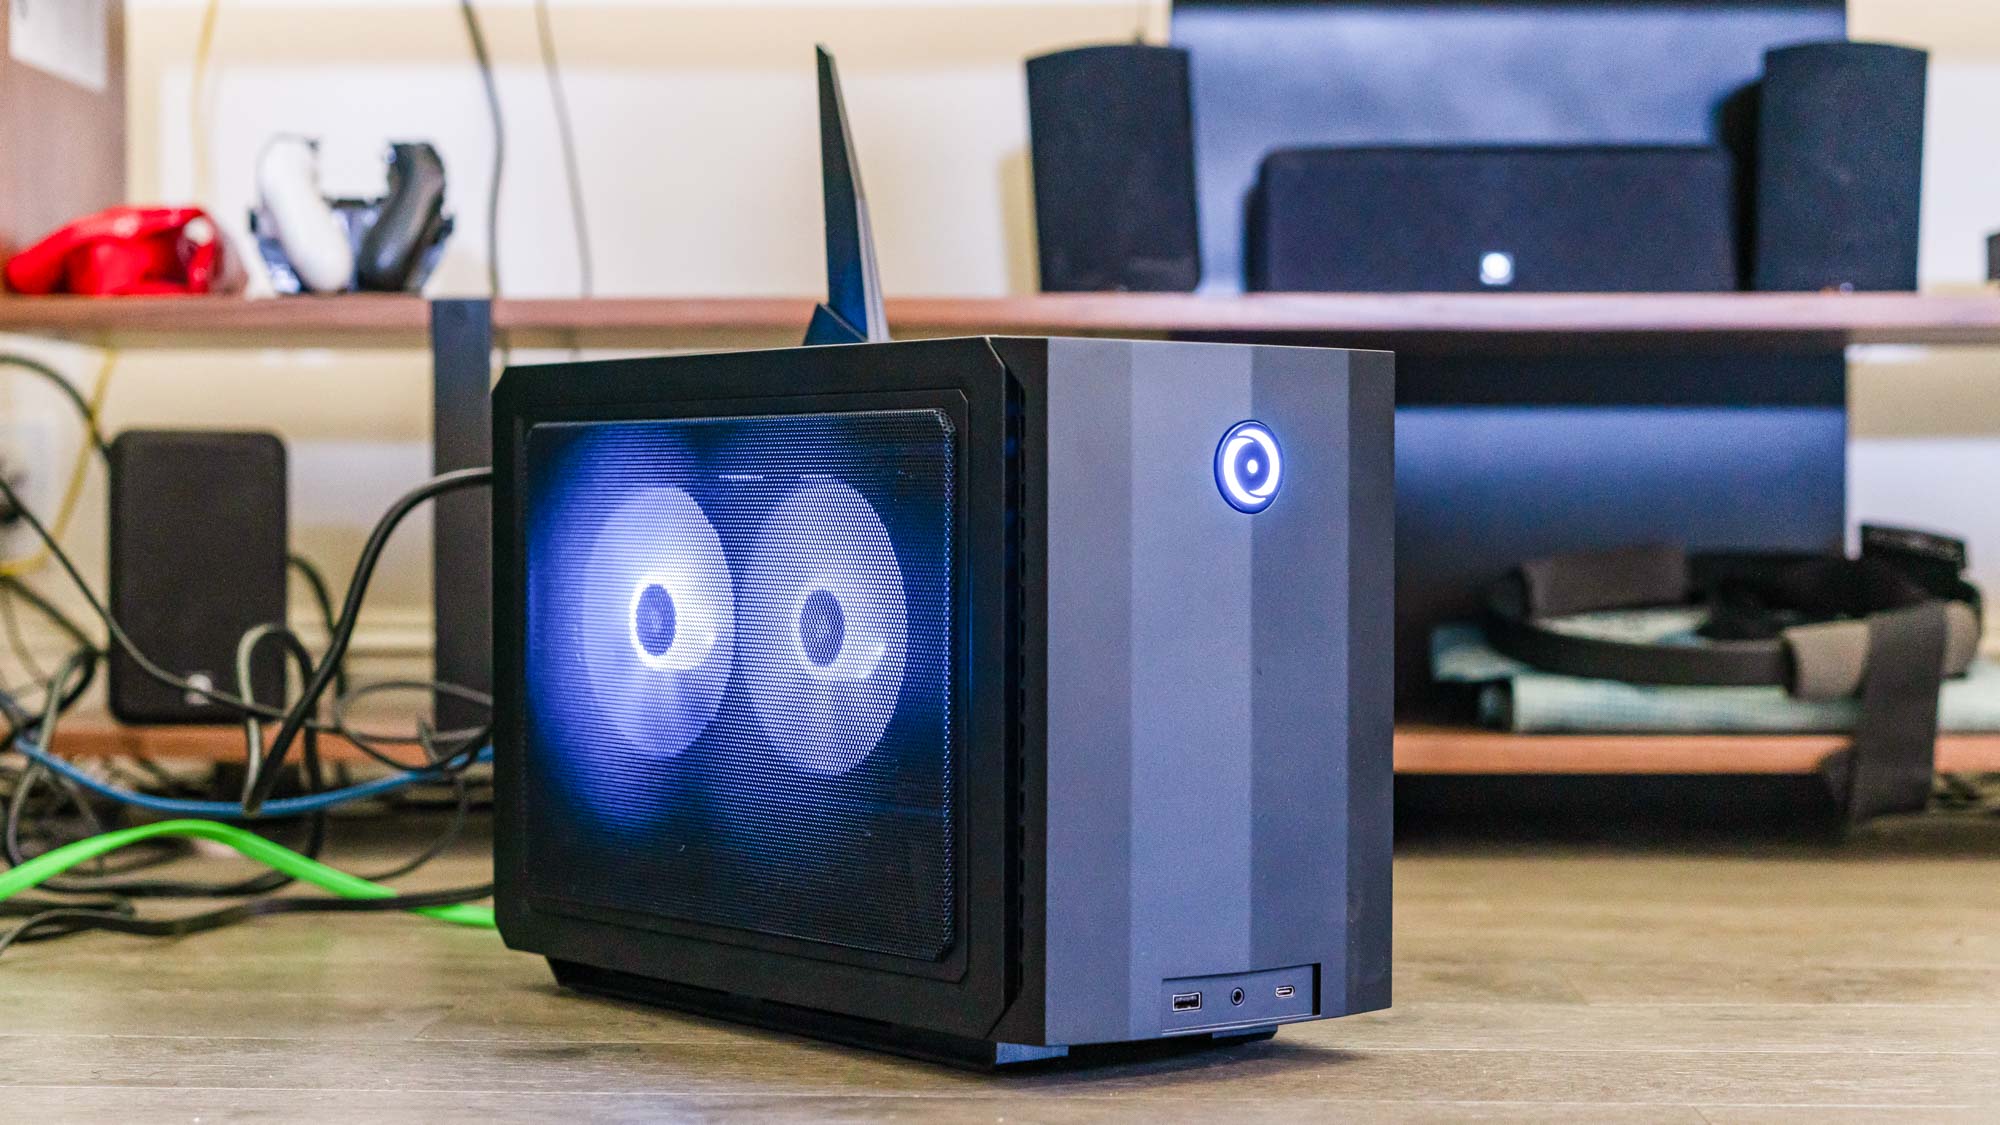 Origin PC Chronos review: A 4K gaming monster in a petite package - CNET